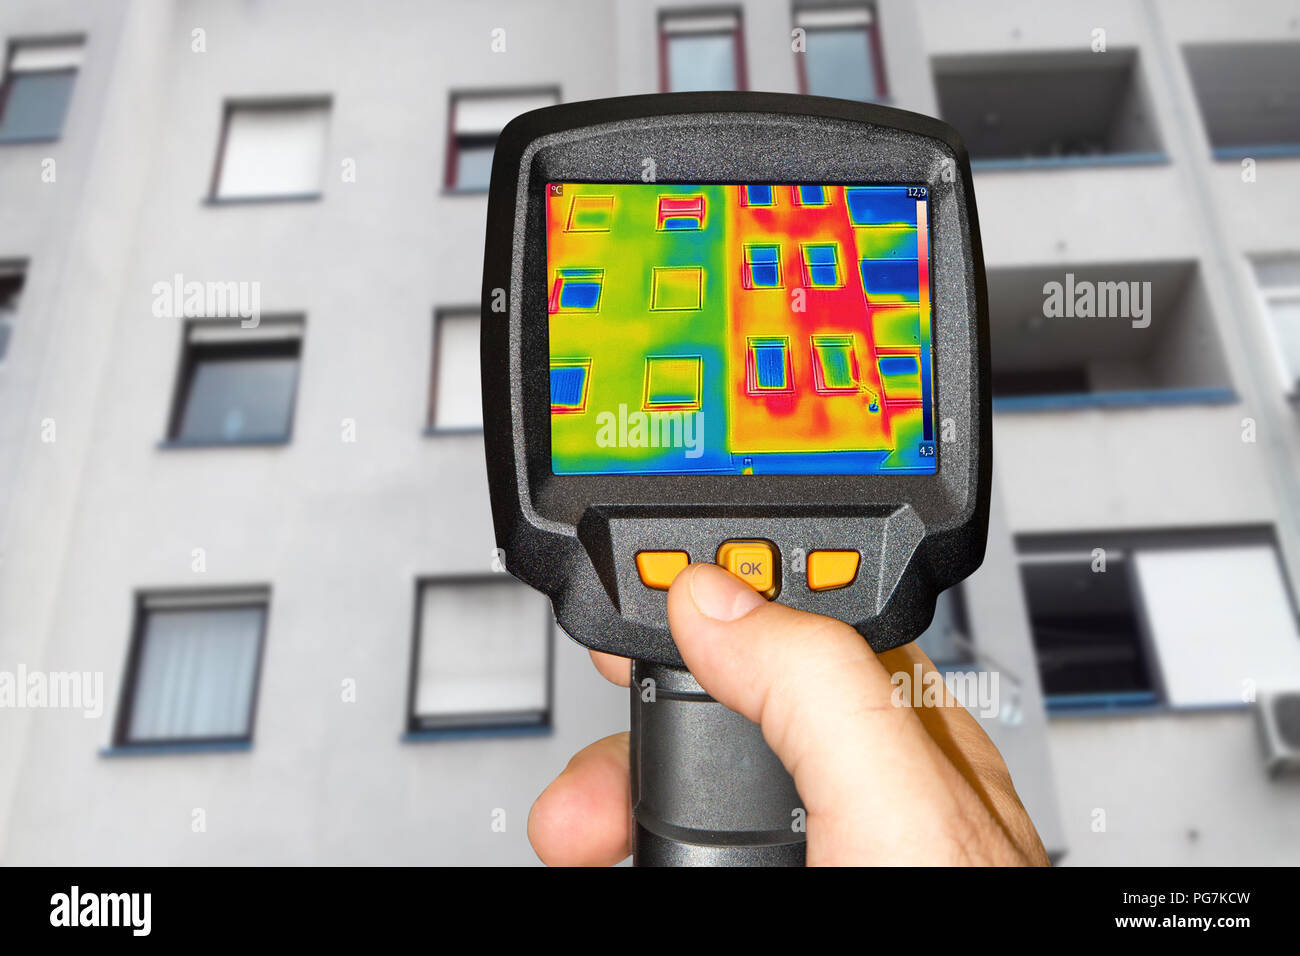 Detecting Heat Loss Outside building Using Infrared Thermal Camera Stock Photo